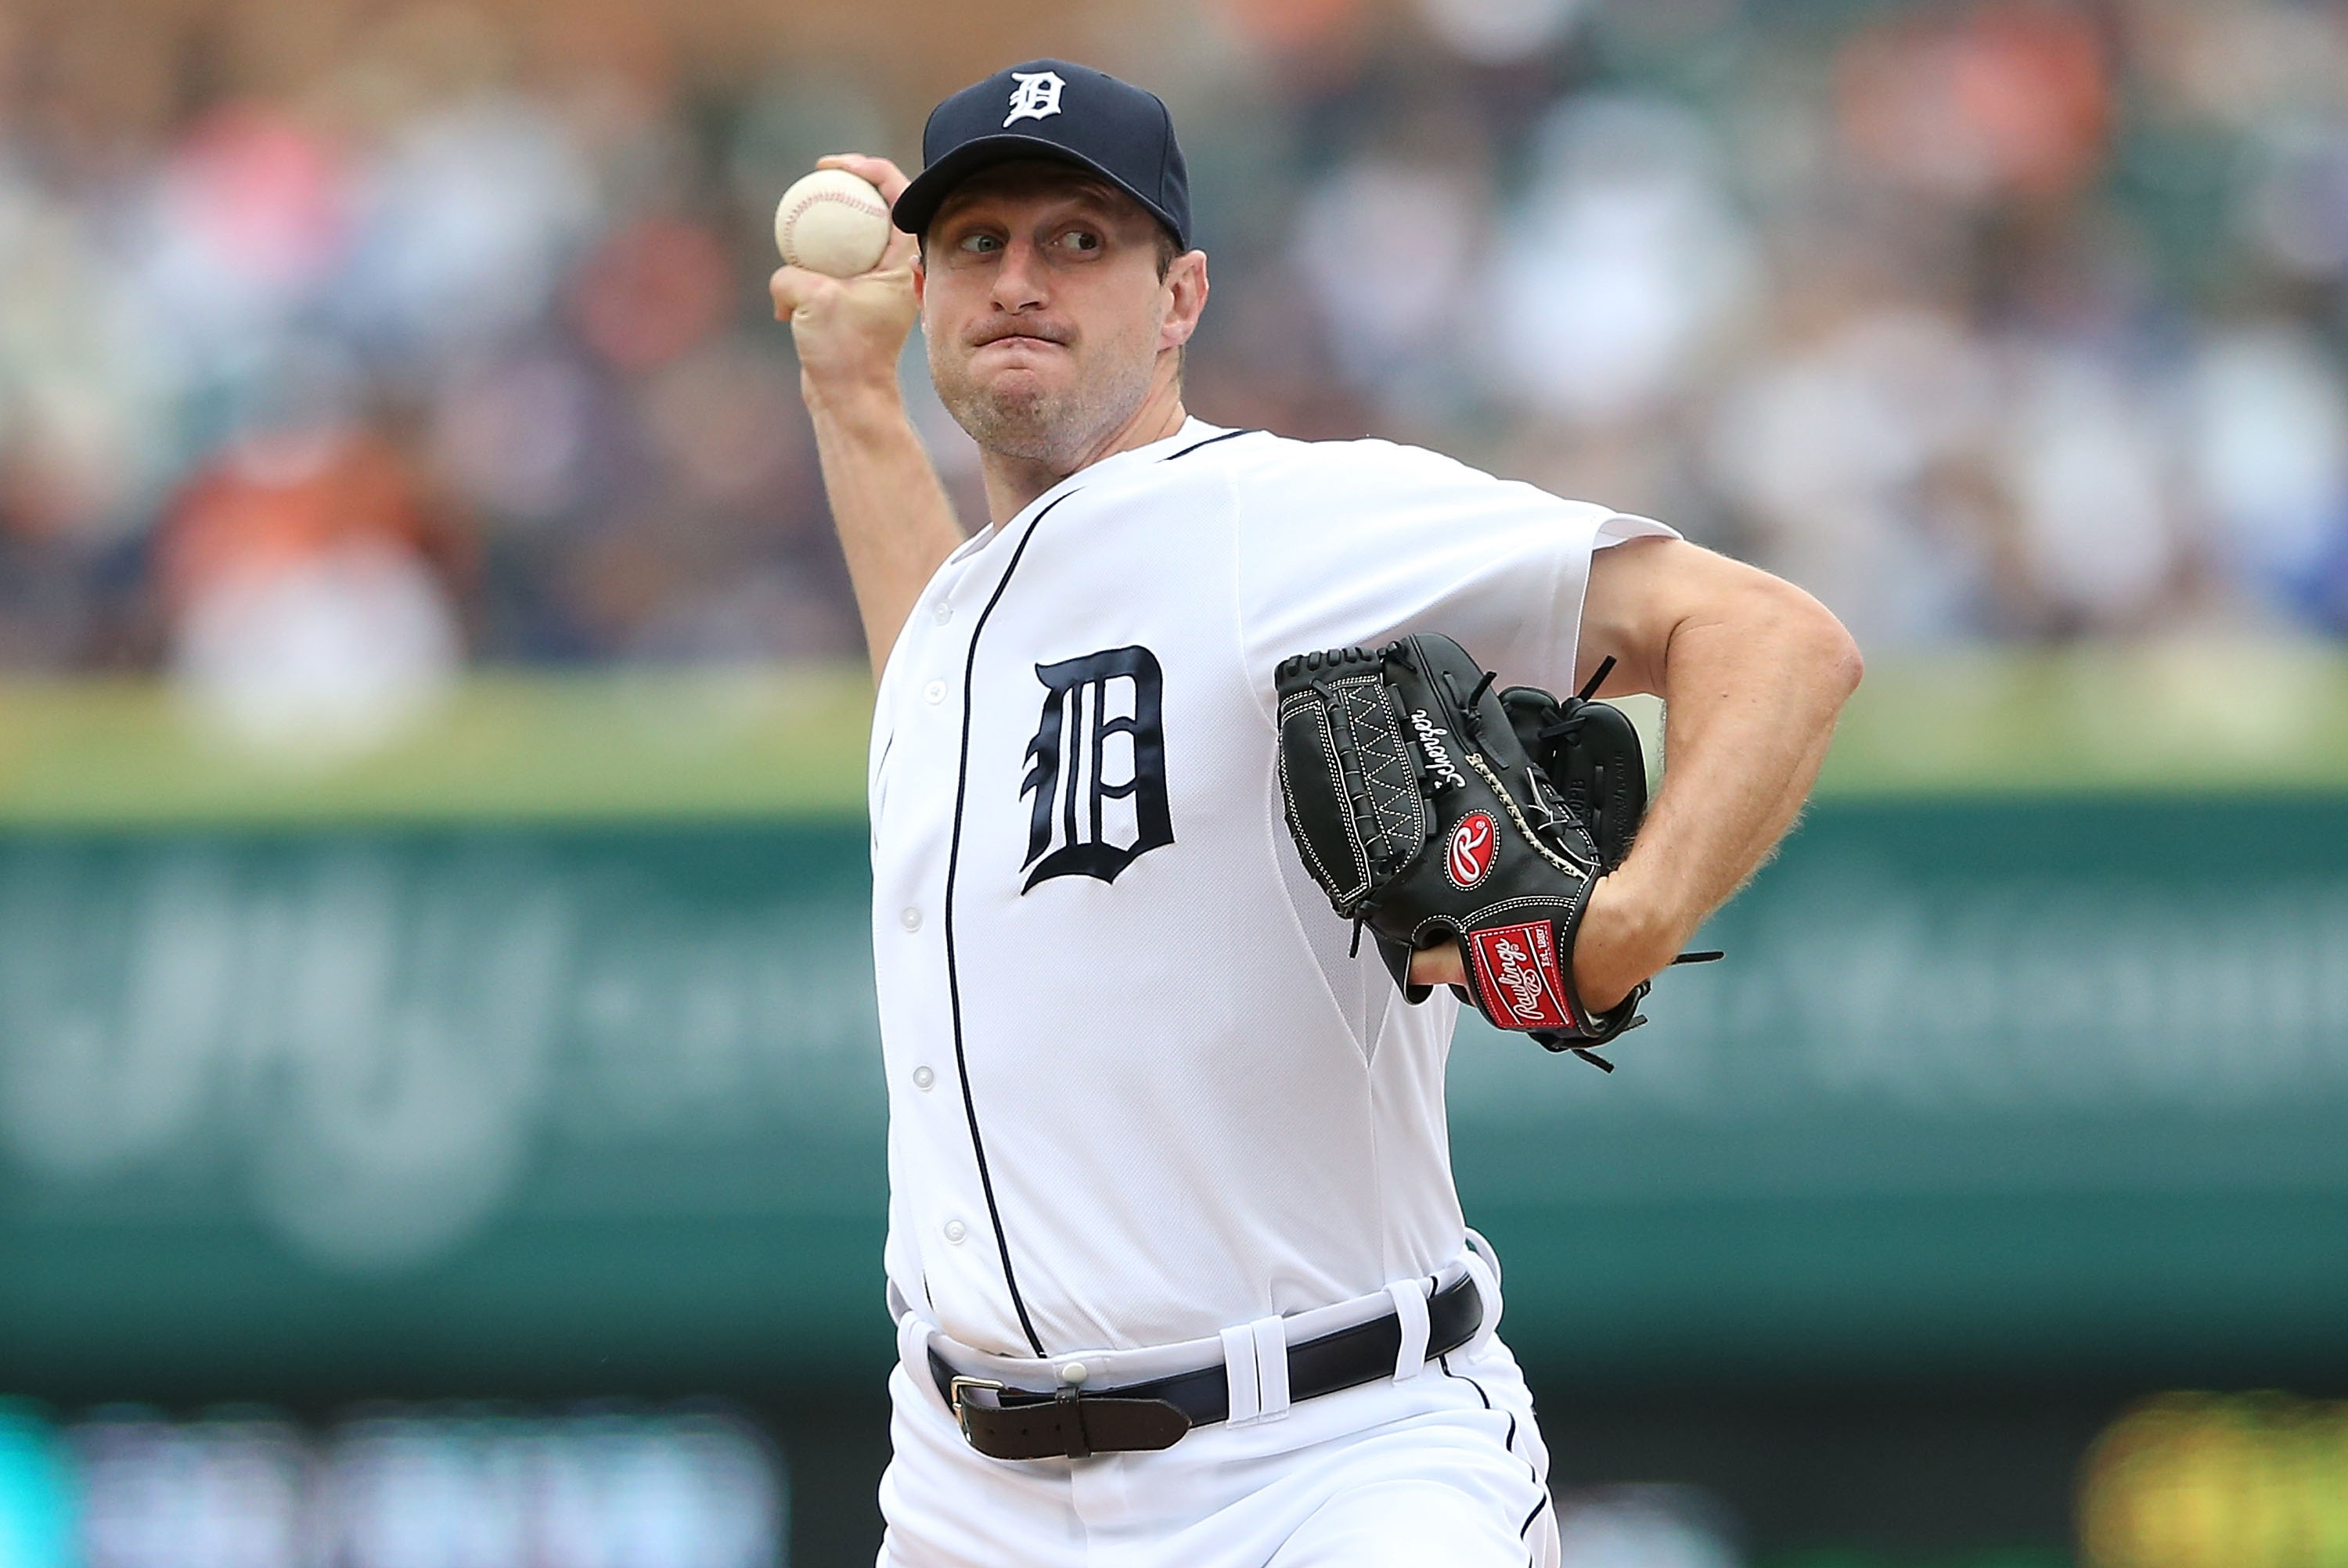 Max Scherzer bet on himself when Detroit Tigers' pitch came up short